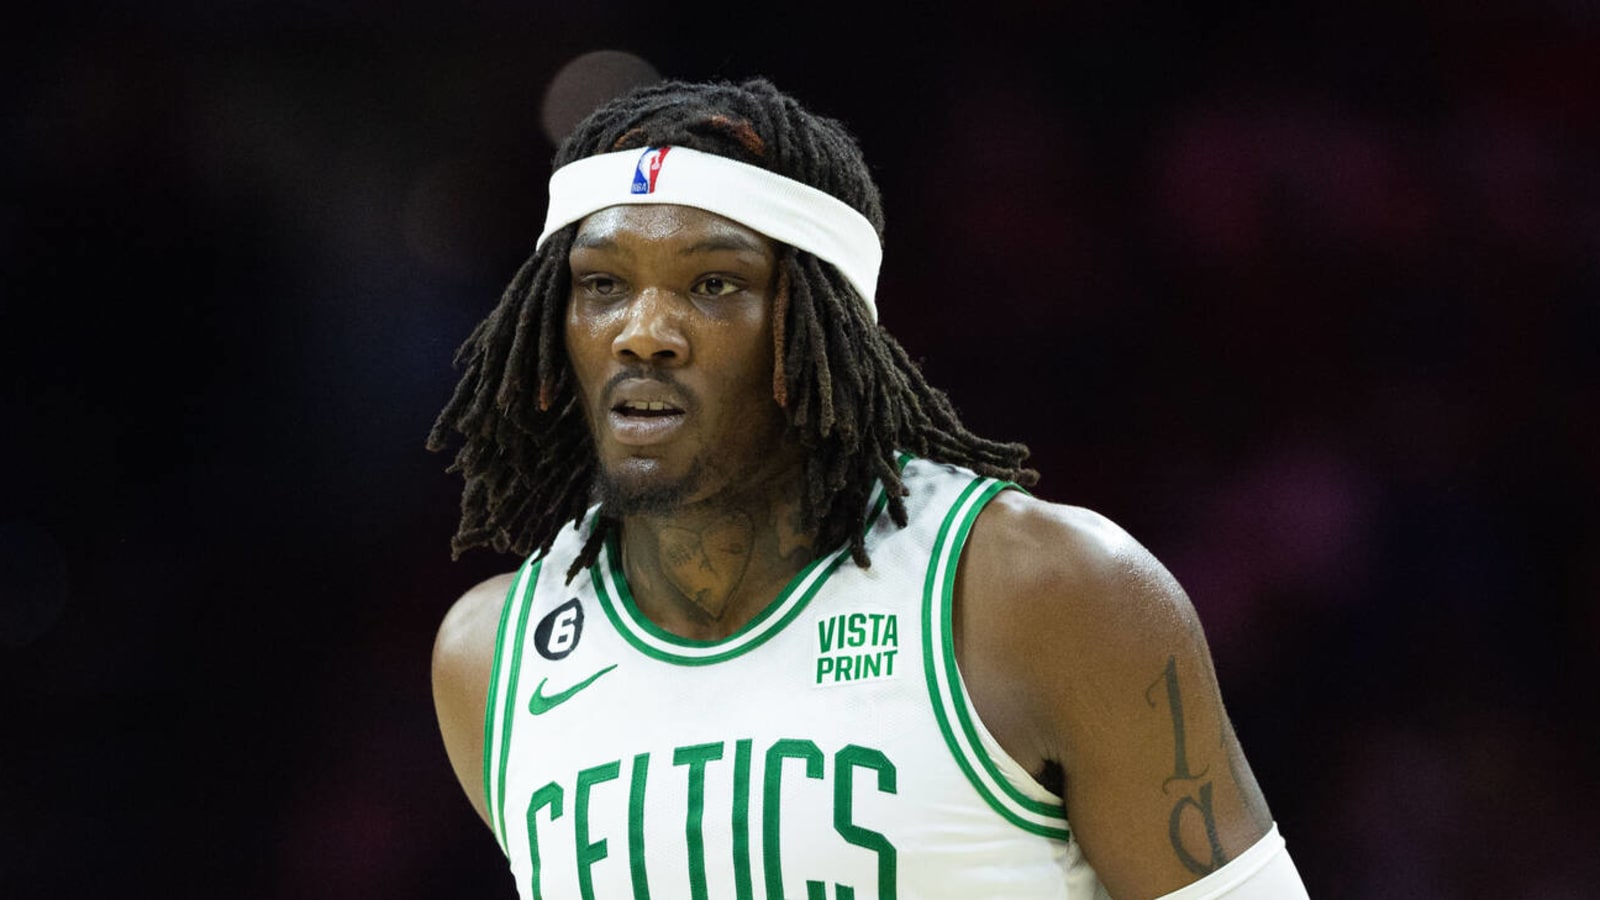 Report: Celtics big man was throwing up during Game 7 vs. Heat